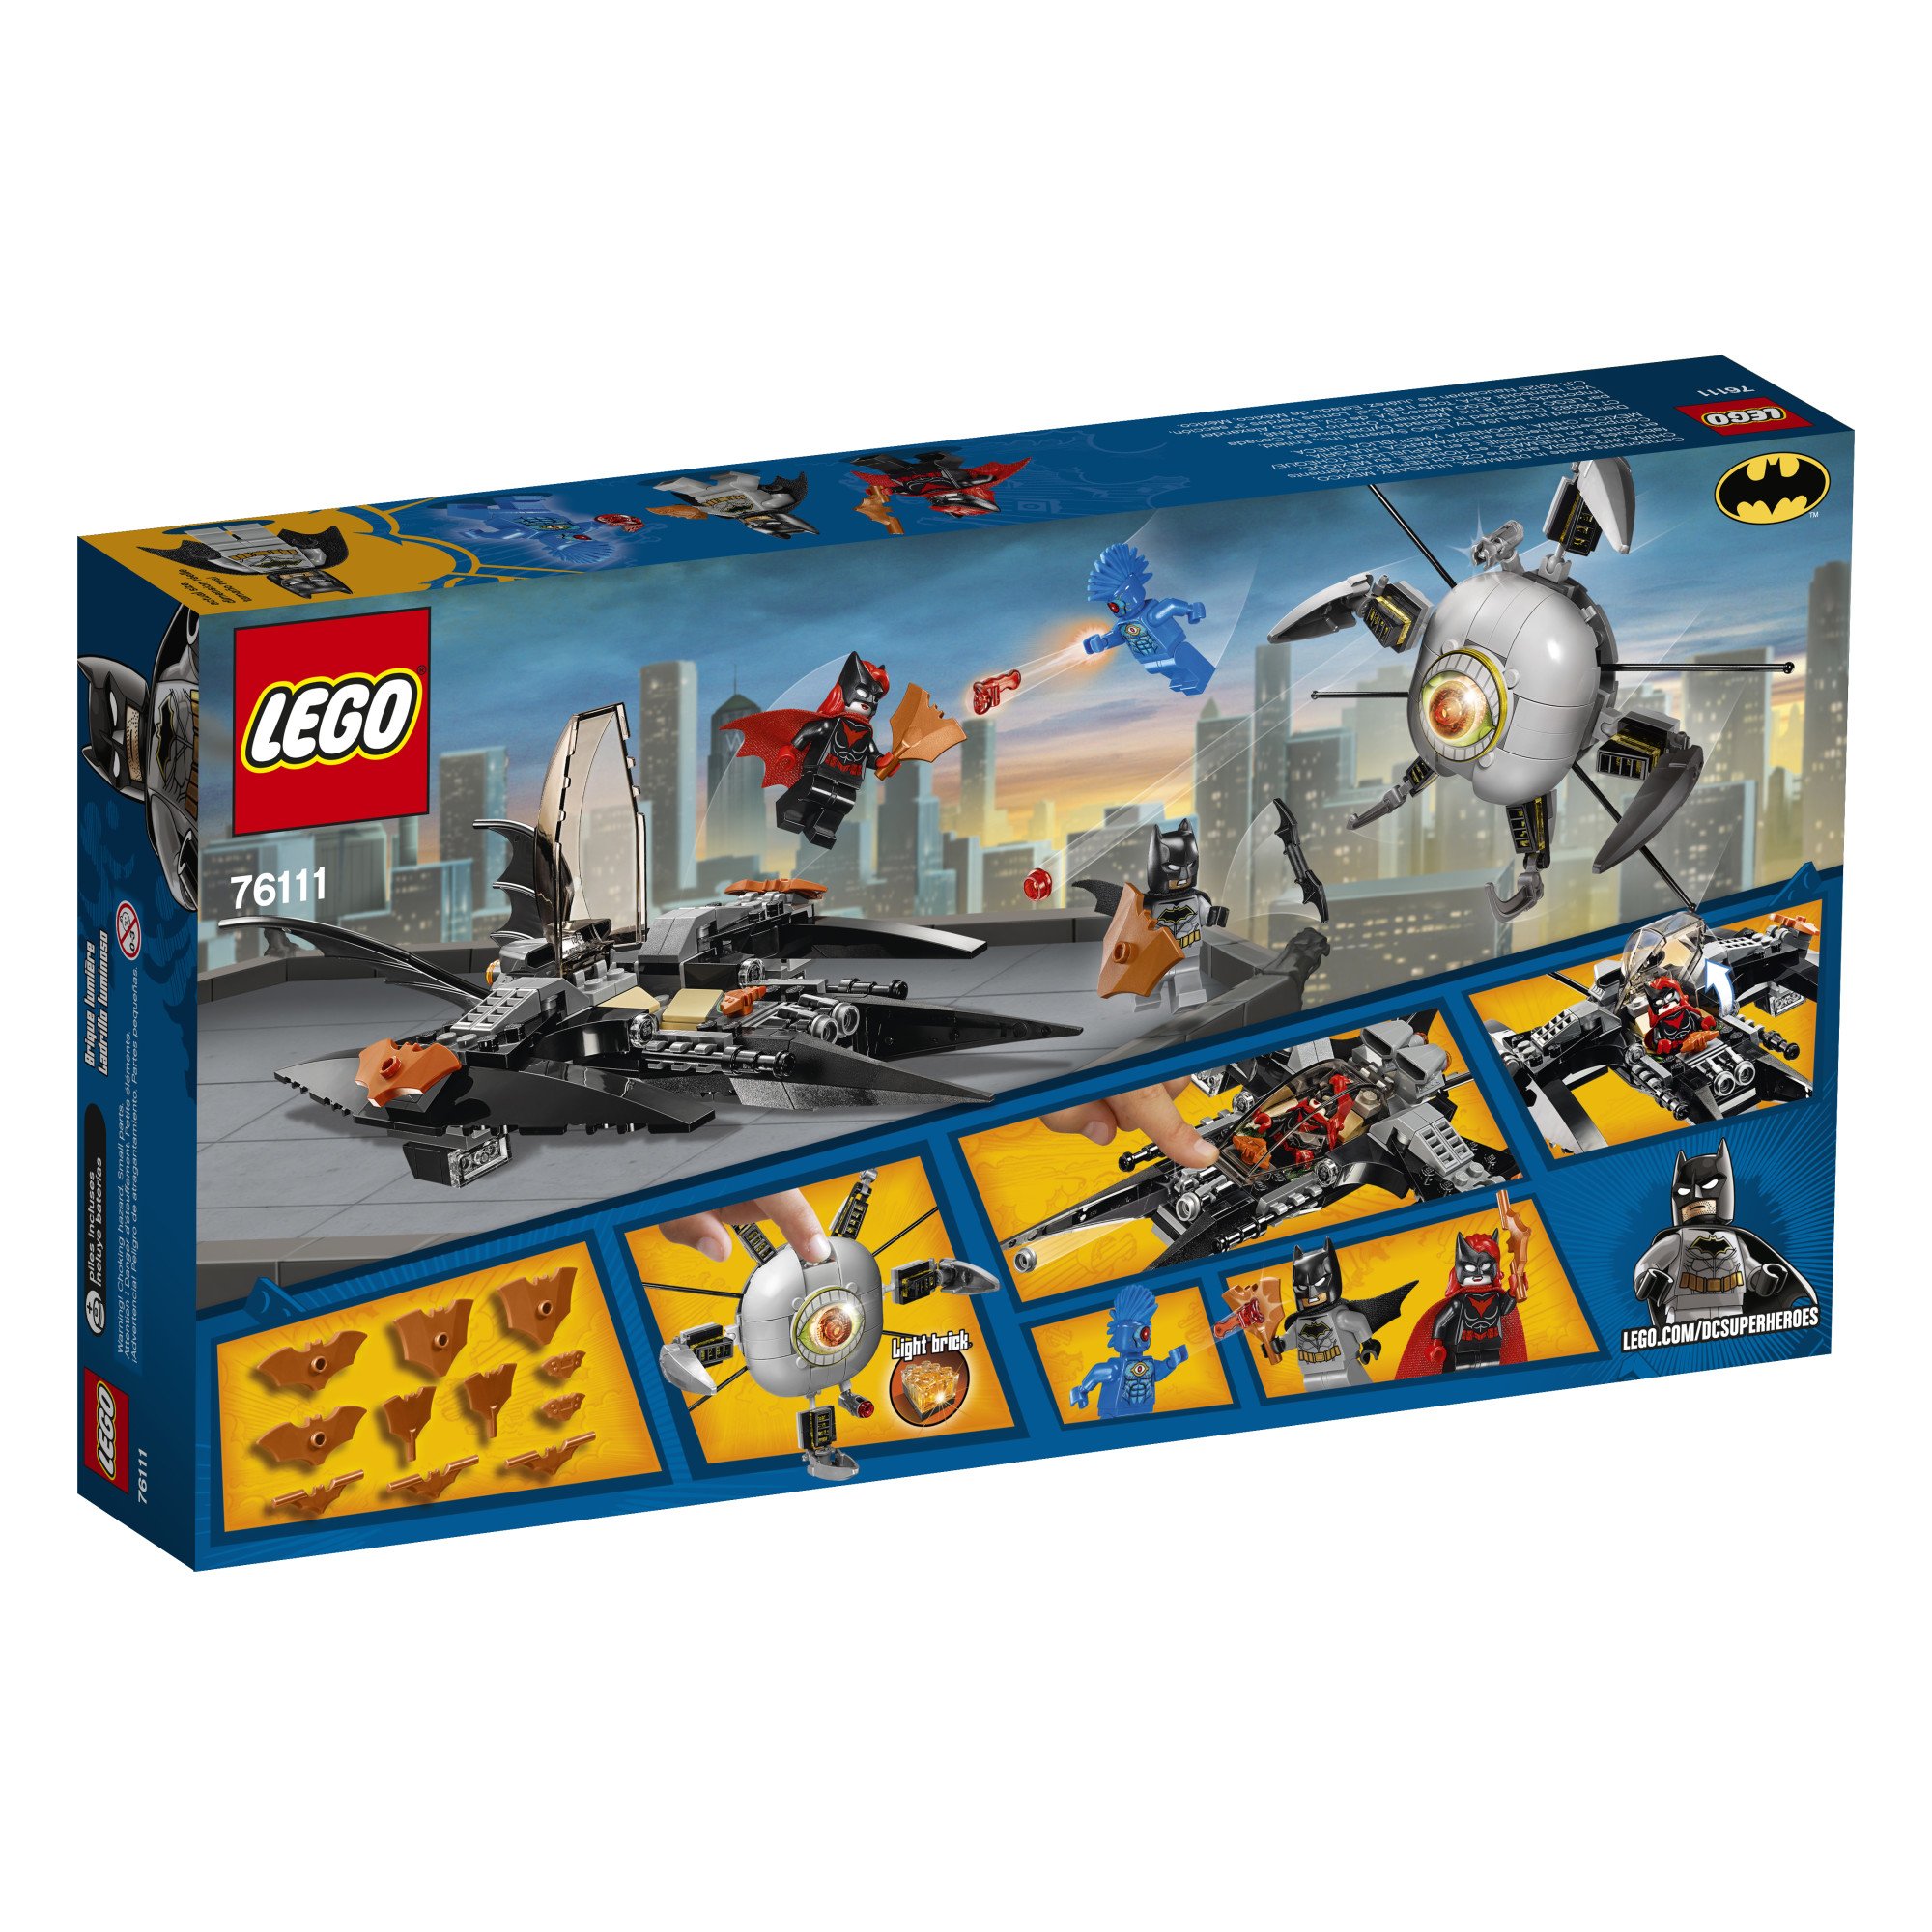 LEGO DC Super Heroes Batman: Brother Eye Takedown 76111 Building Kit (269 Piece) (Discontinued by Manufacturer)